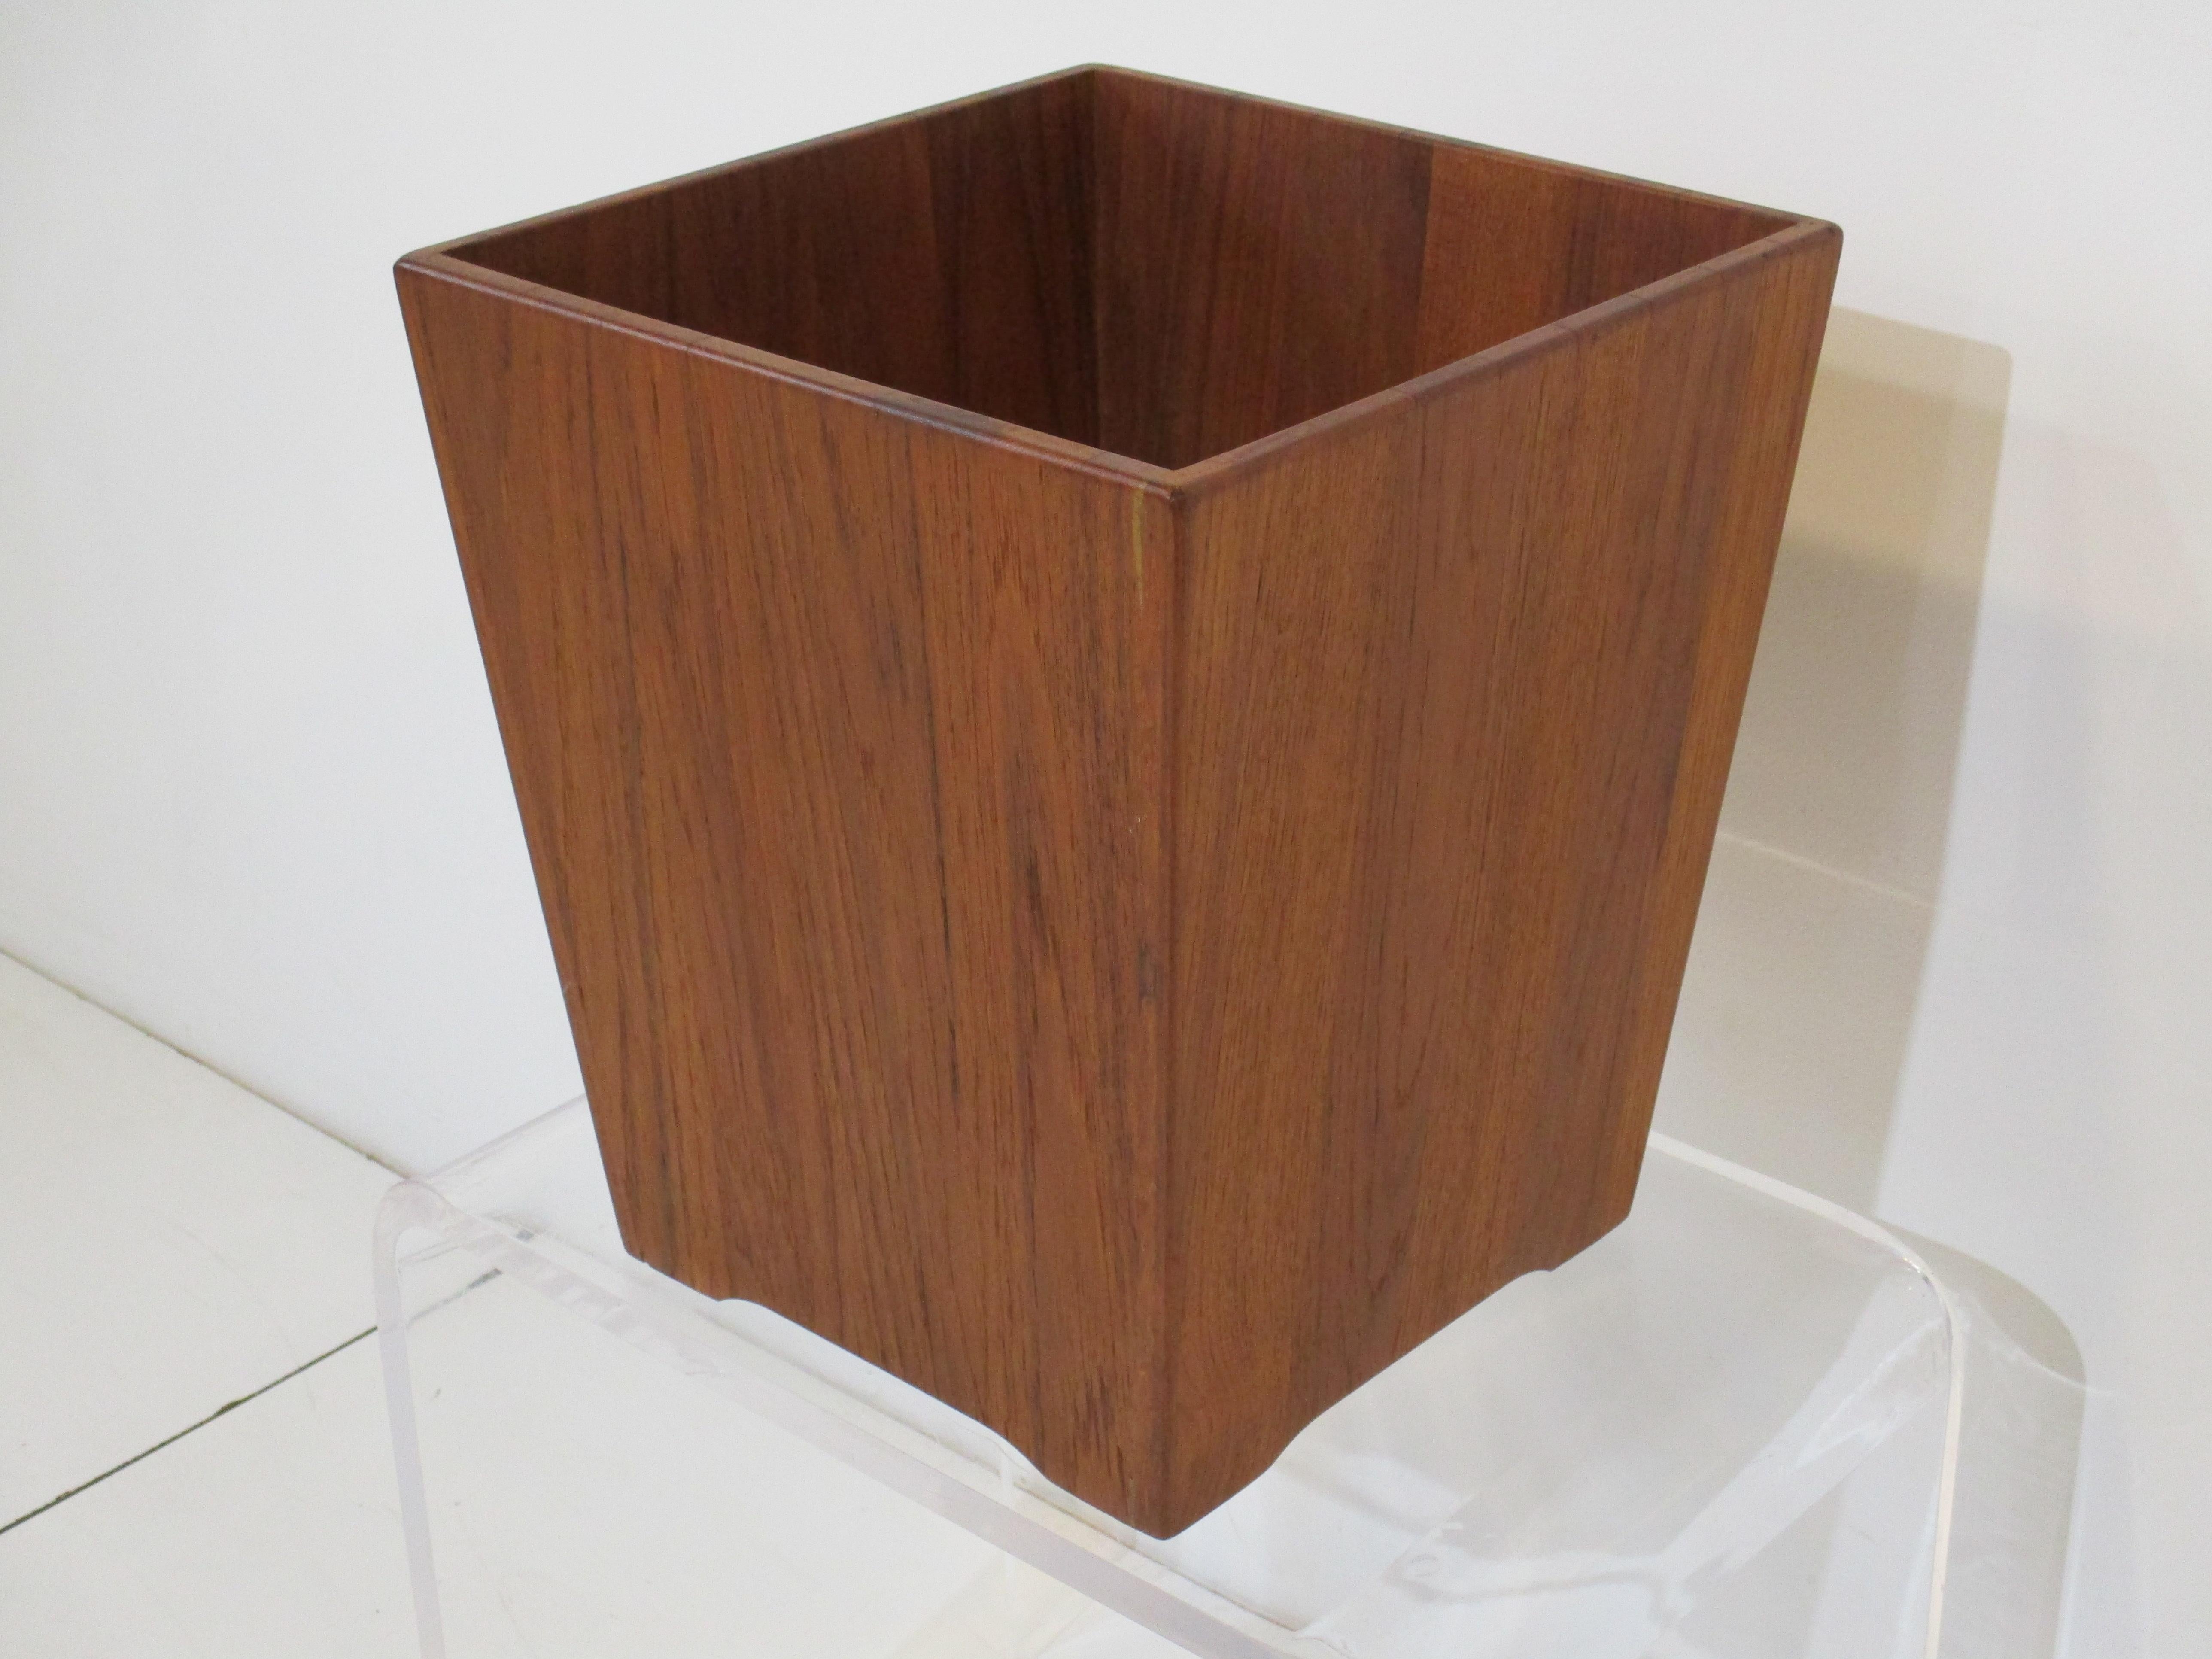 A larger walnut waste basket very well constructed and useful matching most mid century desks from Jens Risom, George Nelson and the Danish styles. Complete the look with this hard to source item.